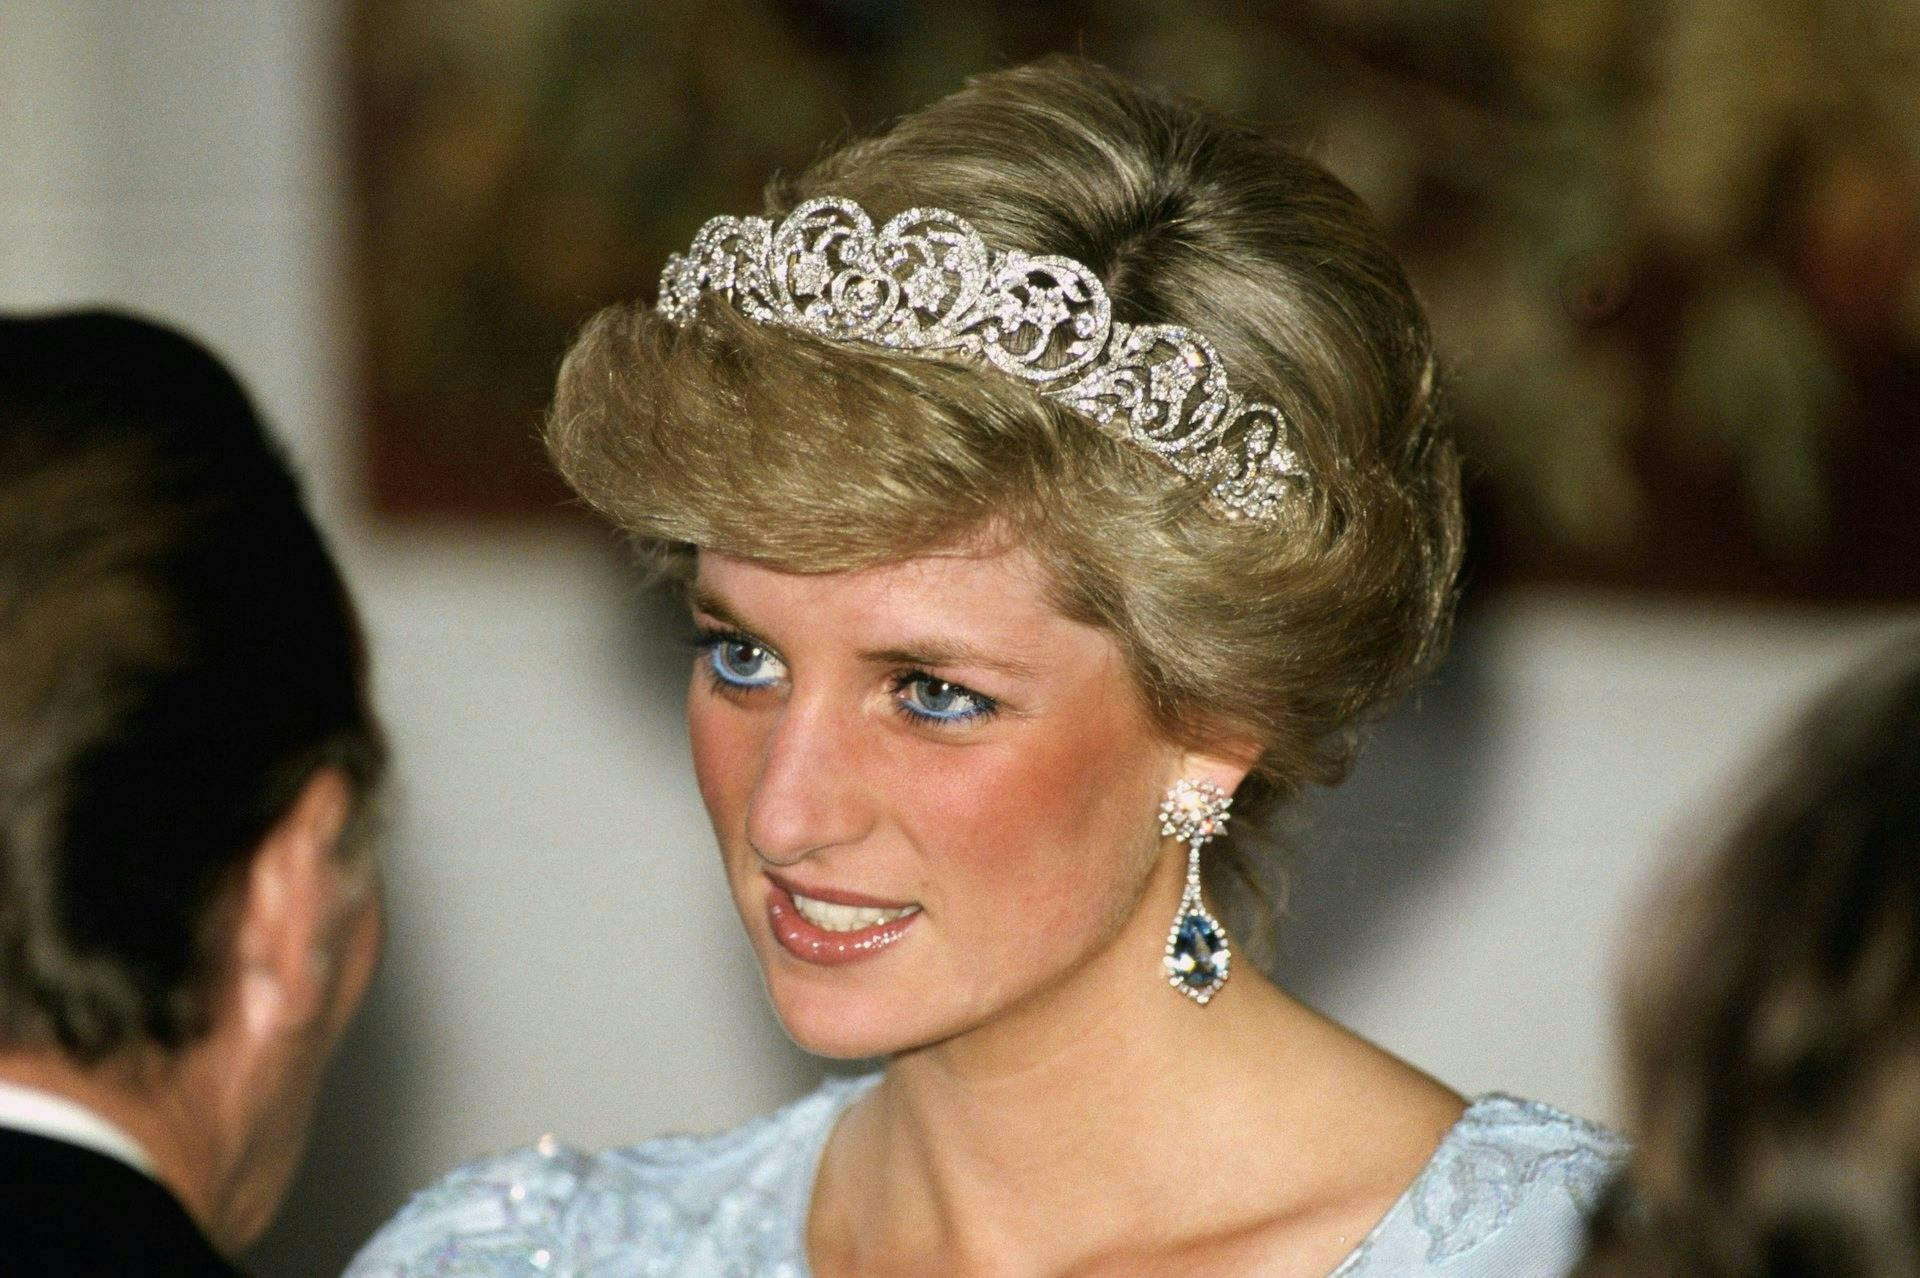 british royal family,diana princess of wales,earrings,evening fu person human accessories accessory jewelry tiara